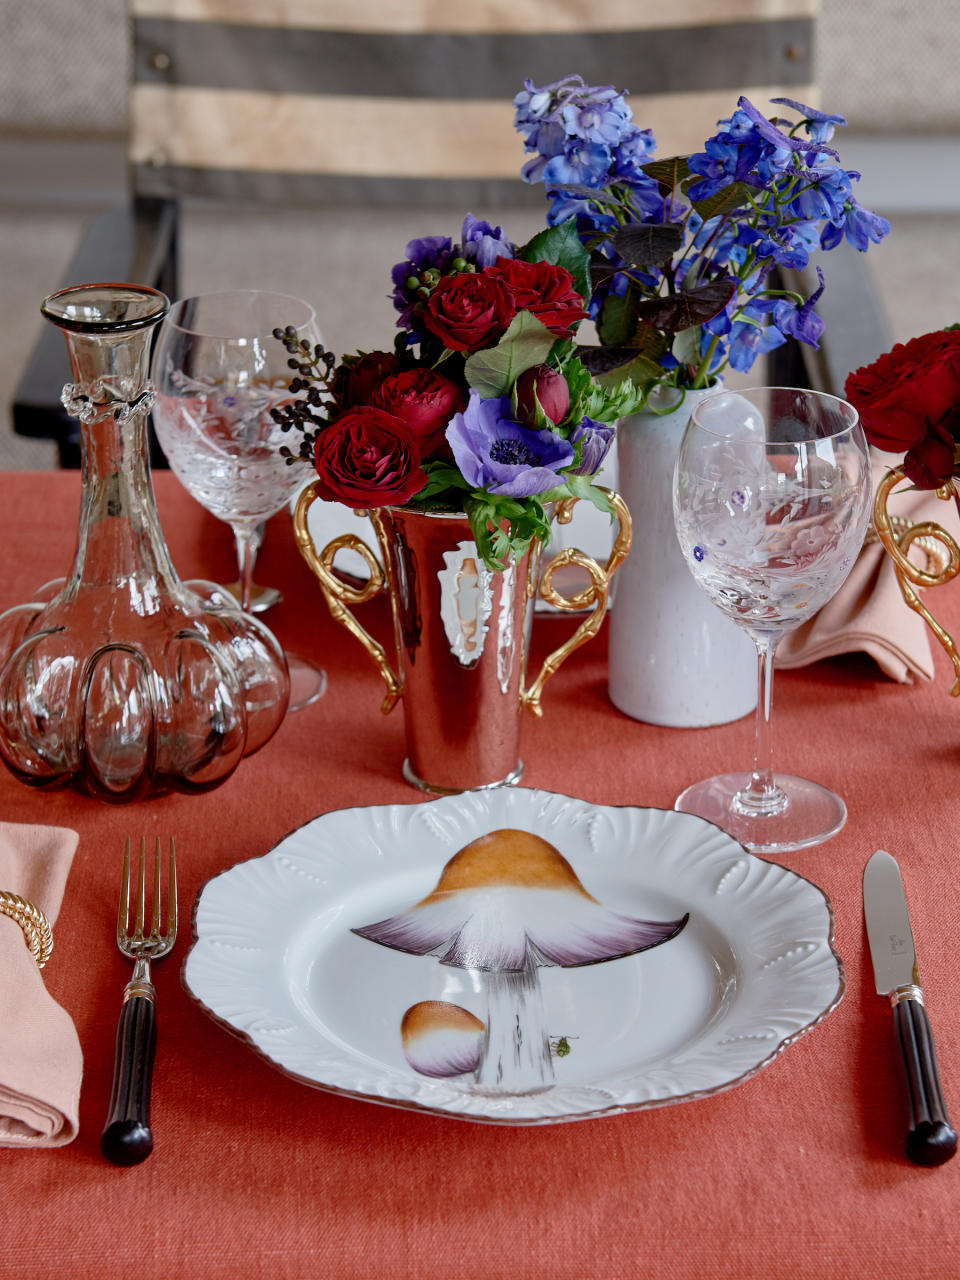 26. Learn the art of French tablescaping